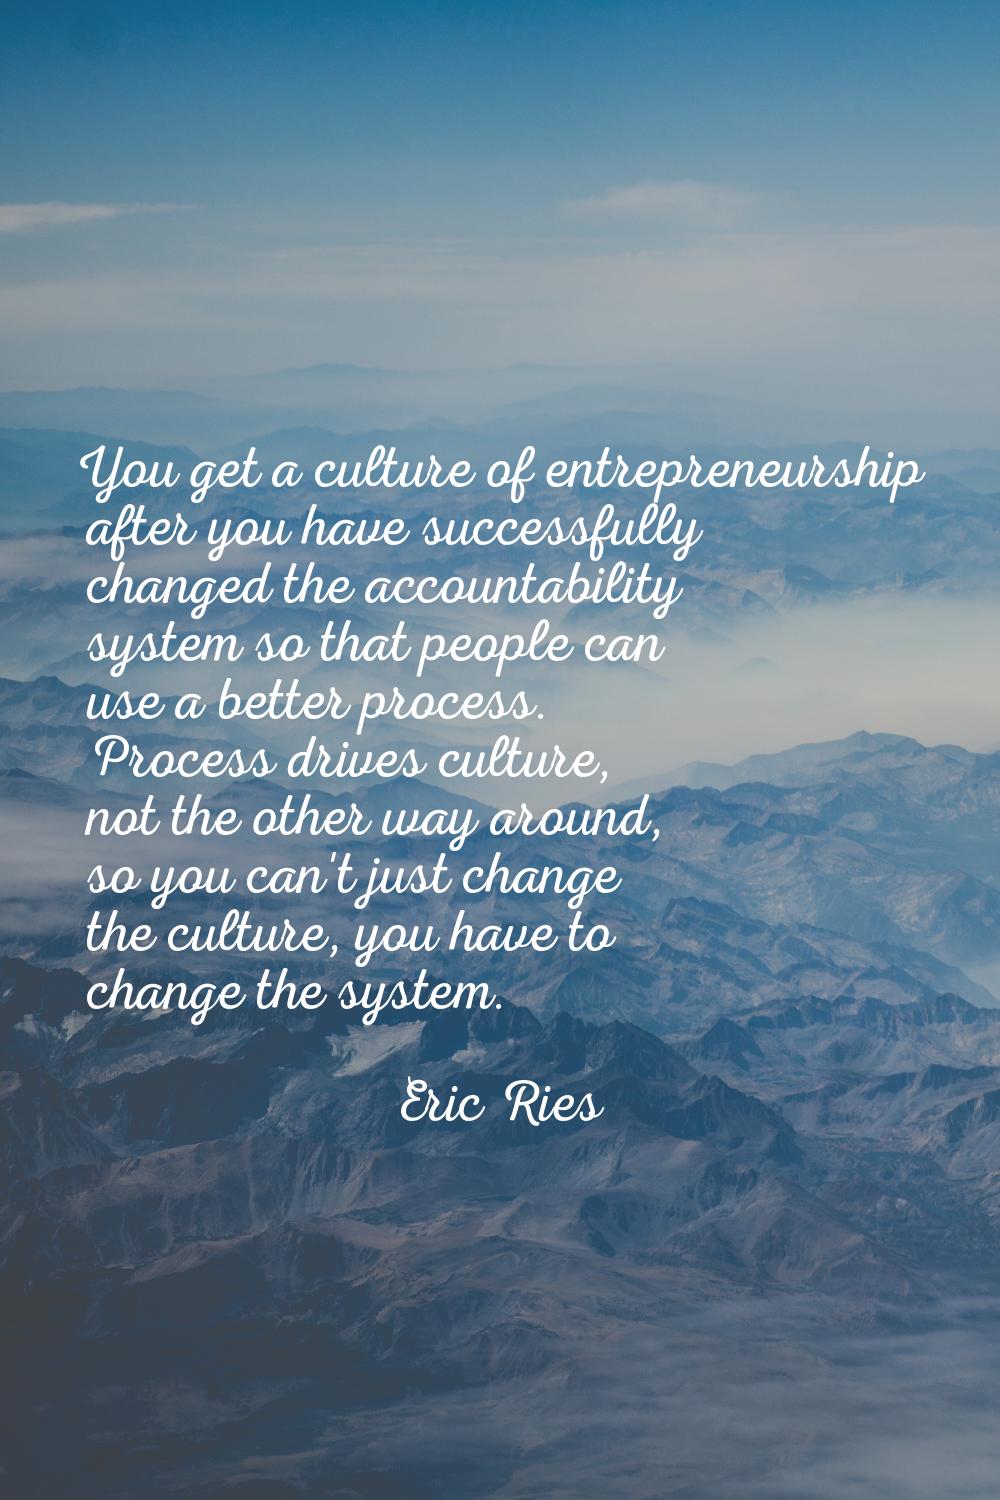 You get a culture of entrepreneurship after you have successfully changed the accountability system